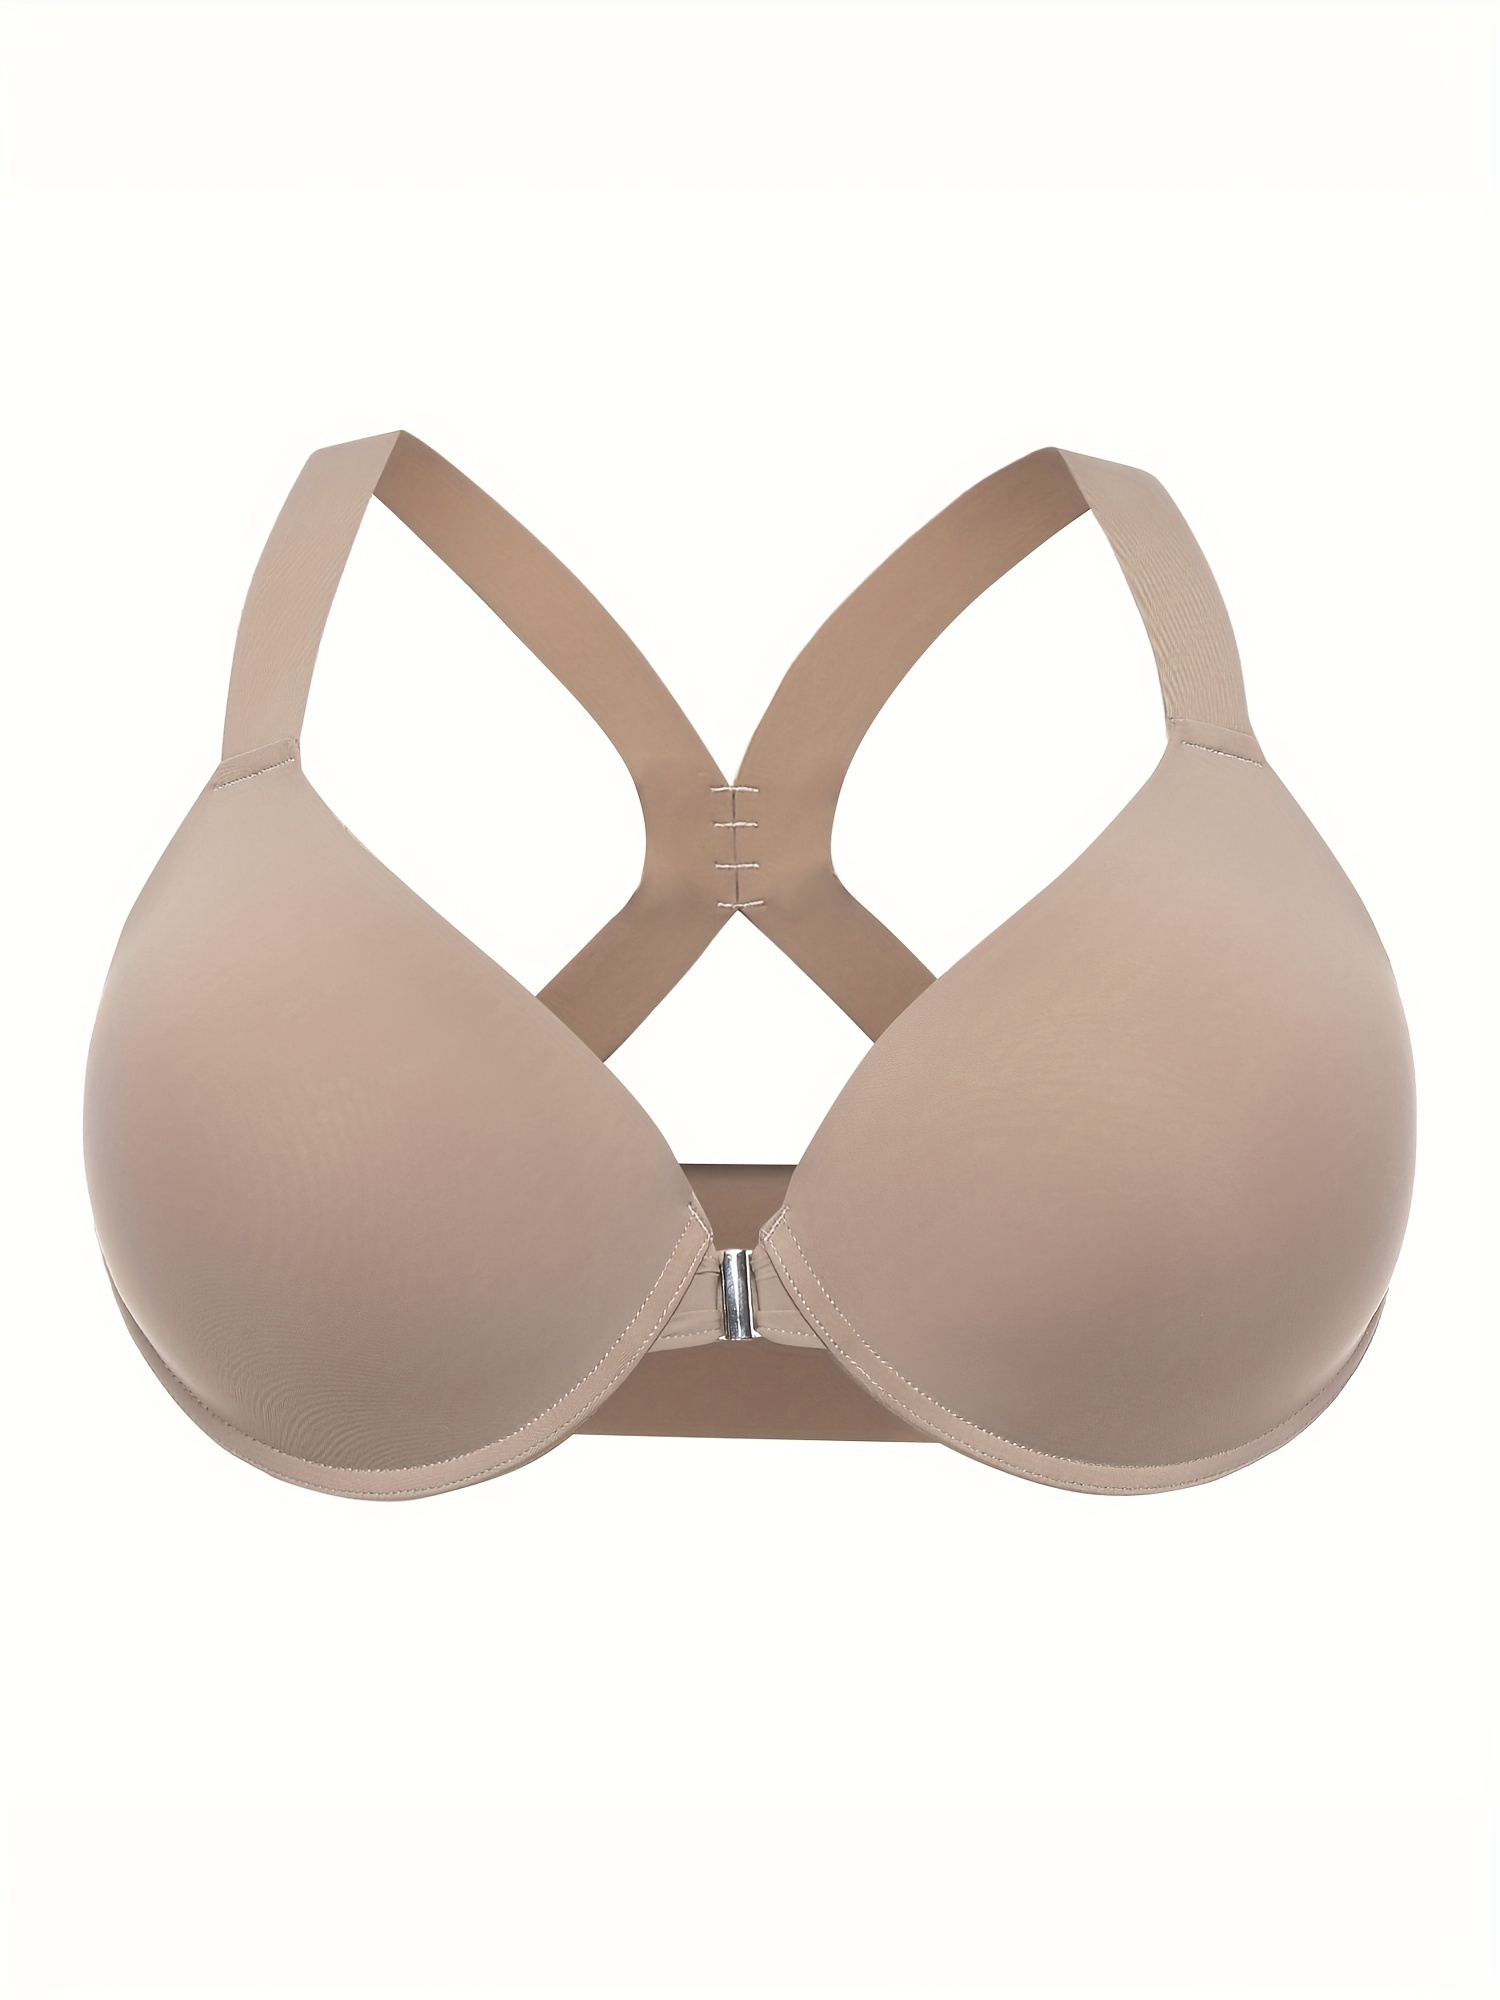 Front Closure Sports Bras for Women,Daisy Bra for Seniors,Convenient Front  Snap Wireless Unlined Full Coverage Everyday Bras